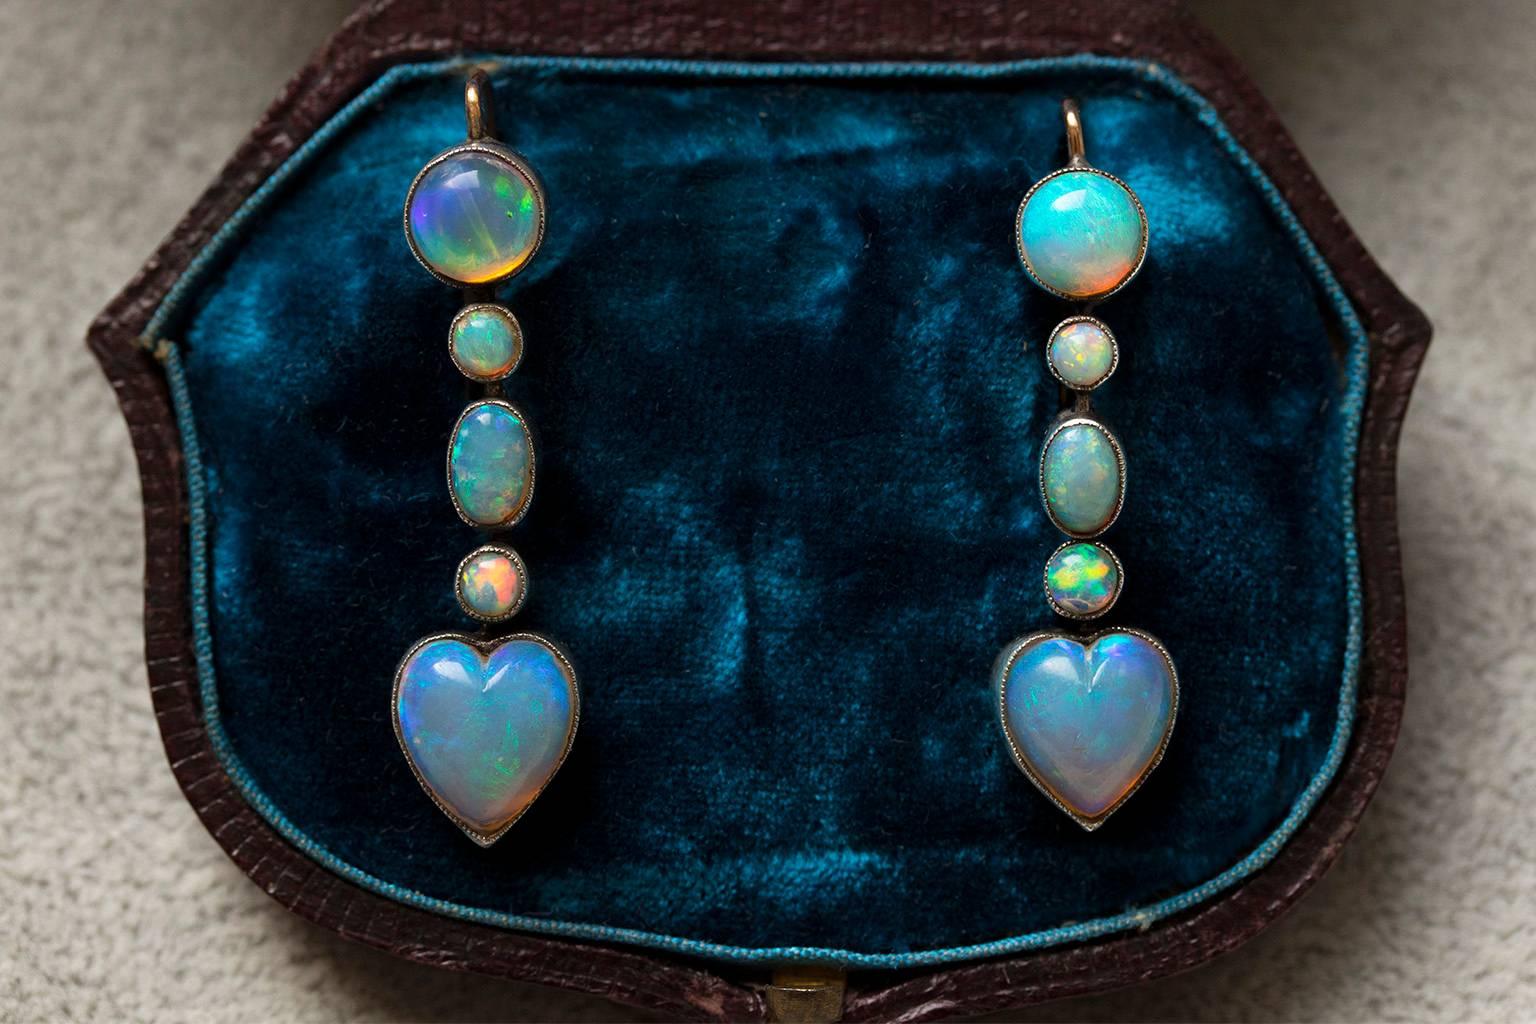 C.1900. A very pretty pair of opal heart drop earrings. The stones are set in milgrain beading, and the colors are all matching with beautiful saturation. The earrings are set in platinum and 15k gold. (tested and back frame & ear wires are 15k